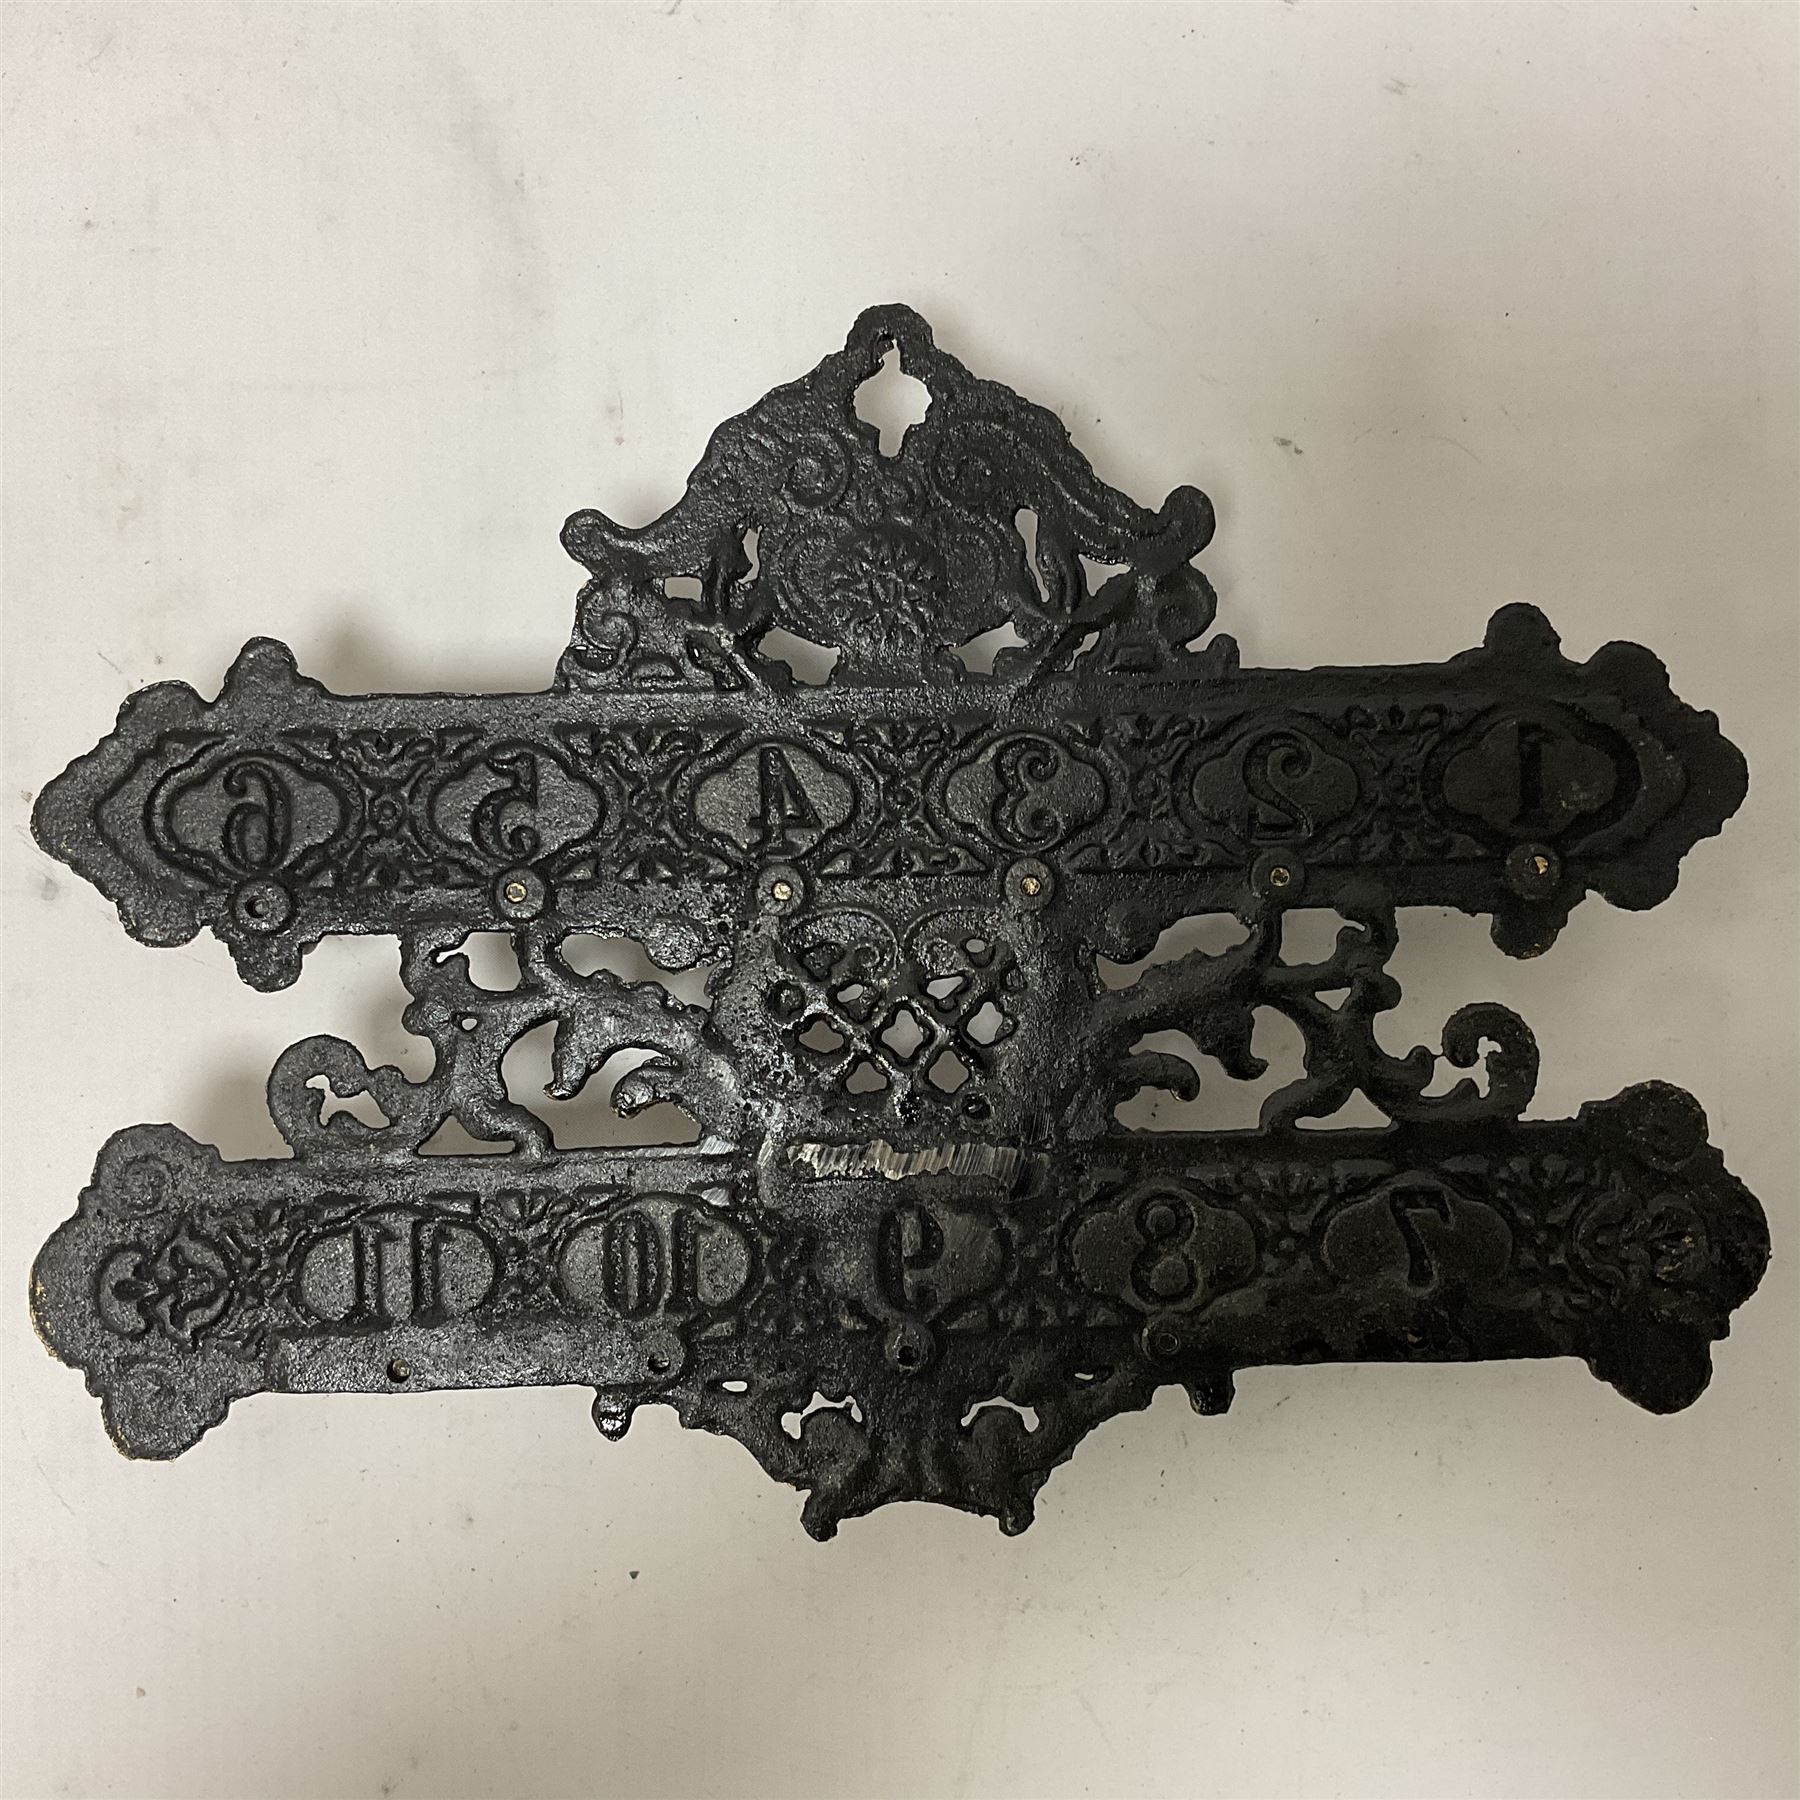 Bronzed cast metal numbered key rack of pierced and scrolled design - Image 6 of 6